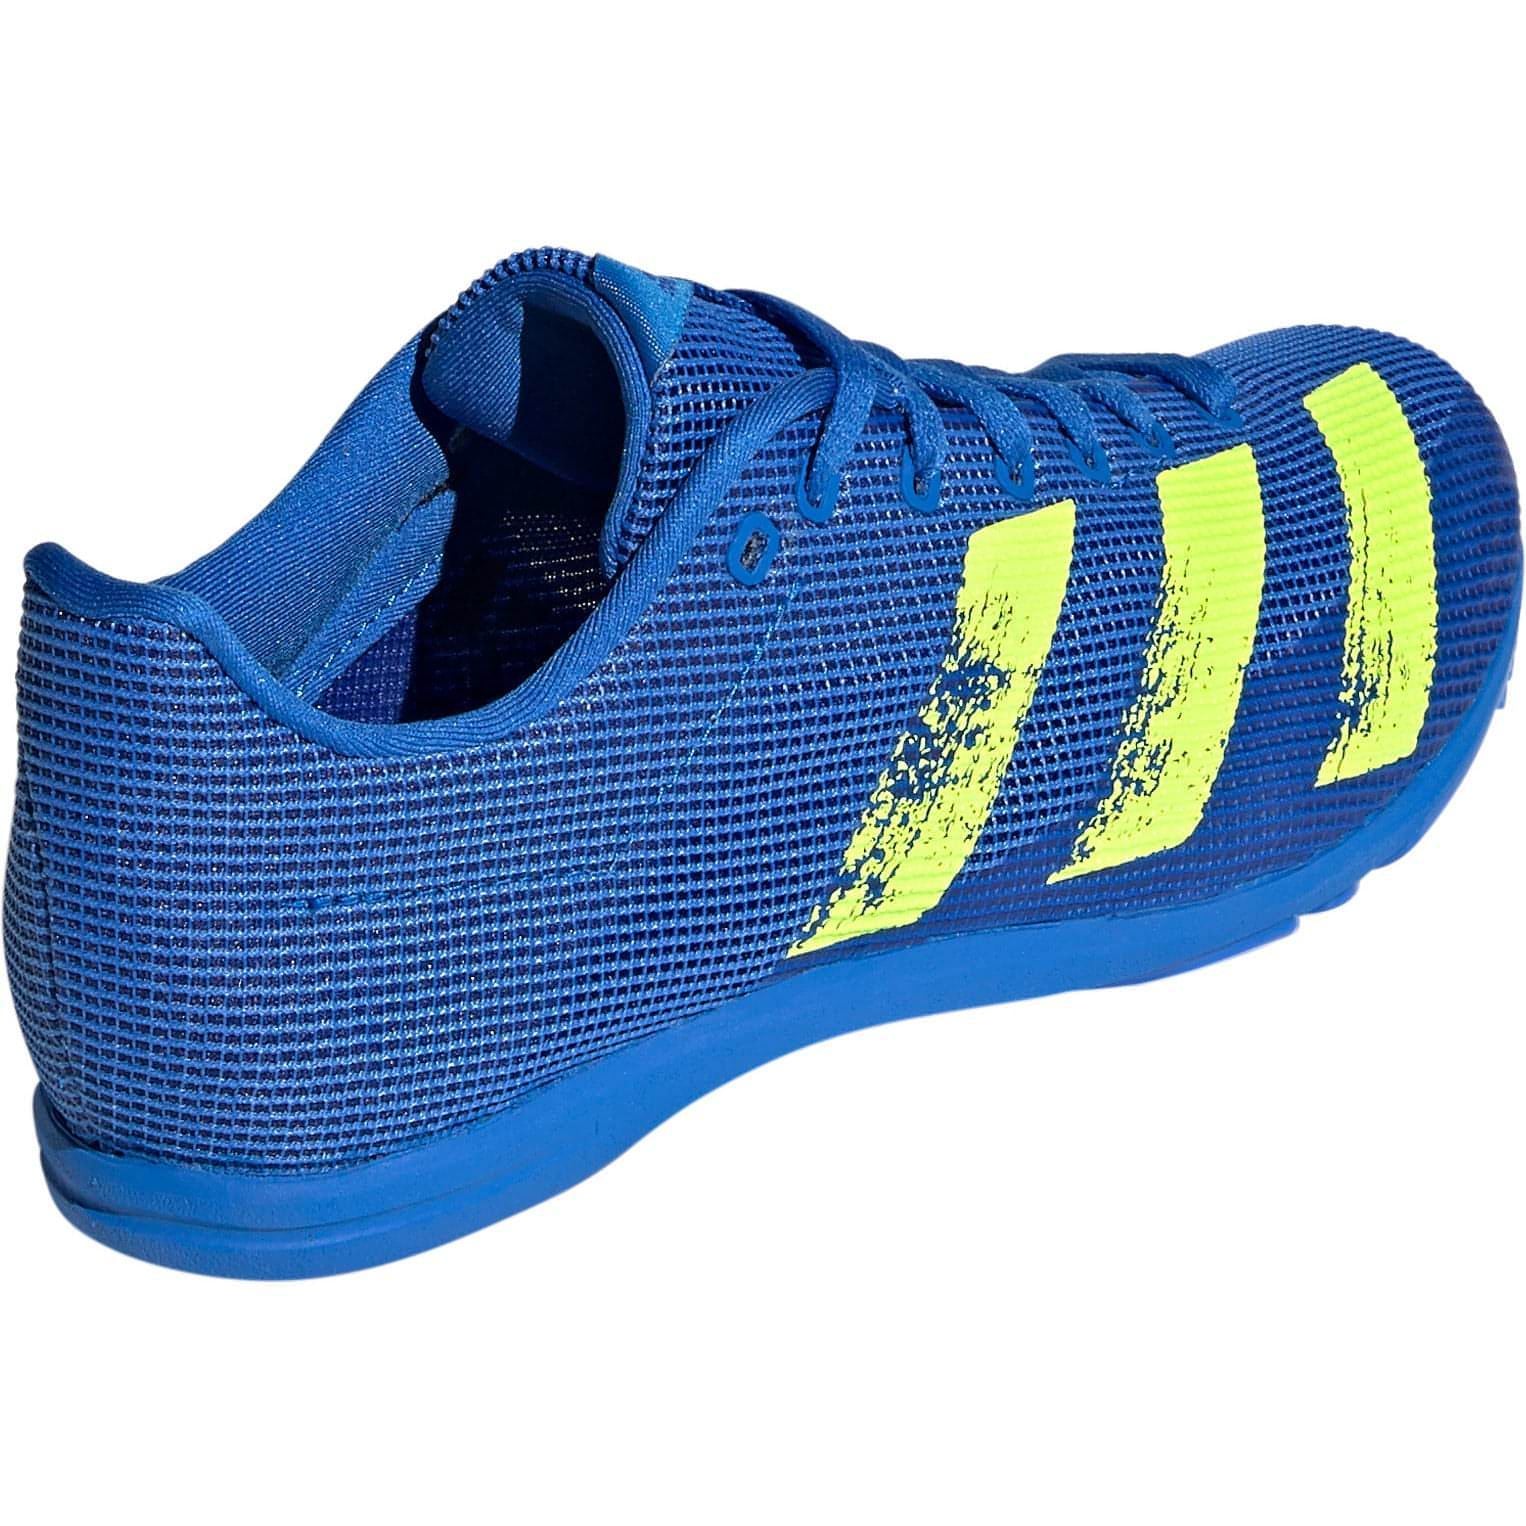 Adidas Allroundstar Fy0329 Back View